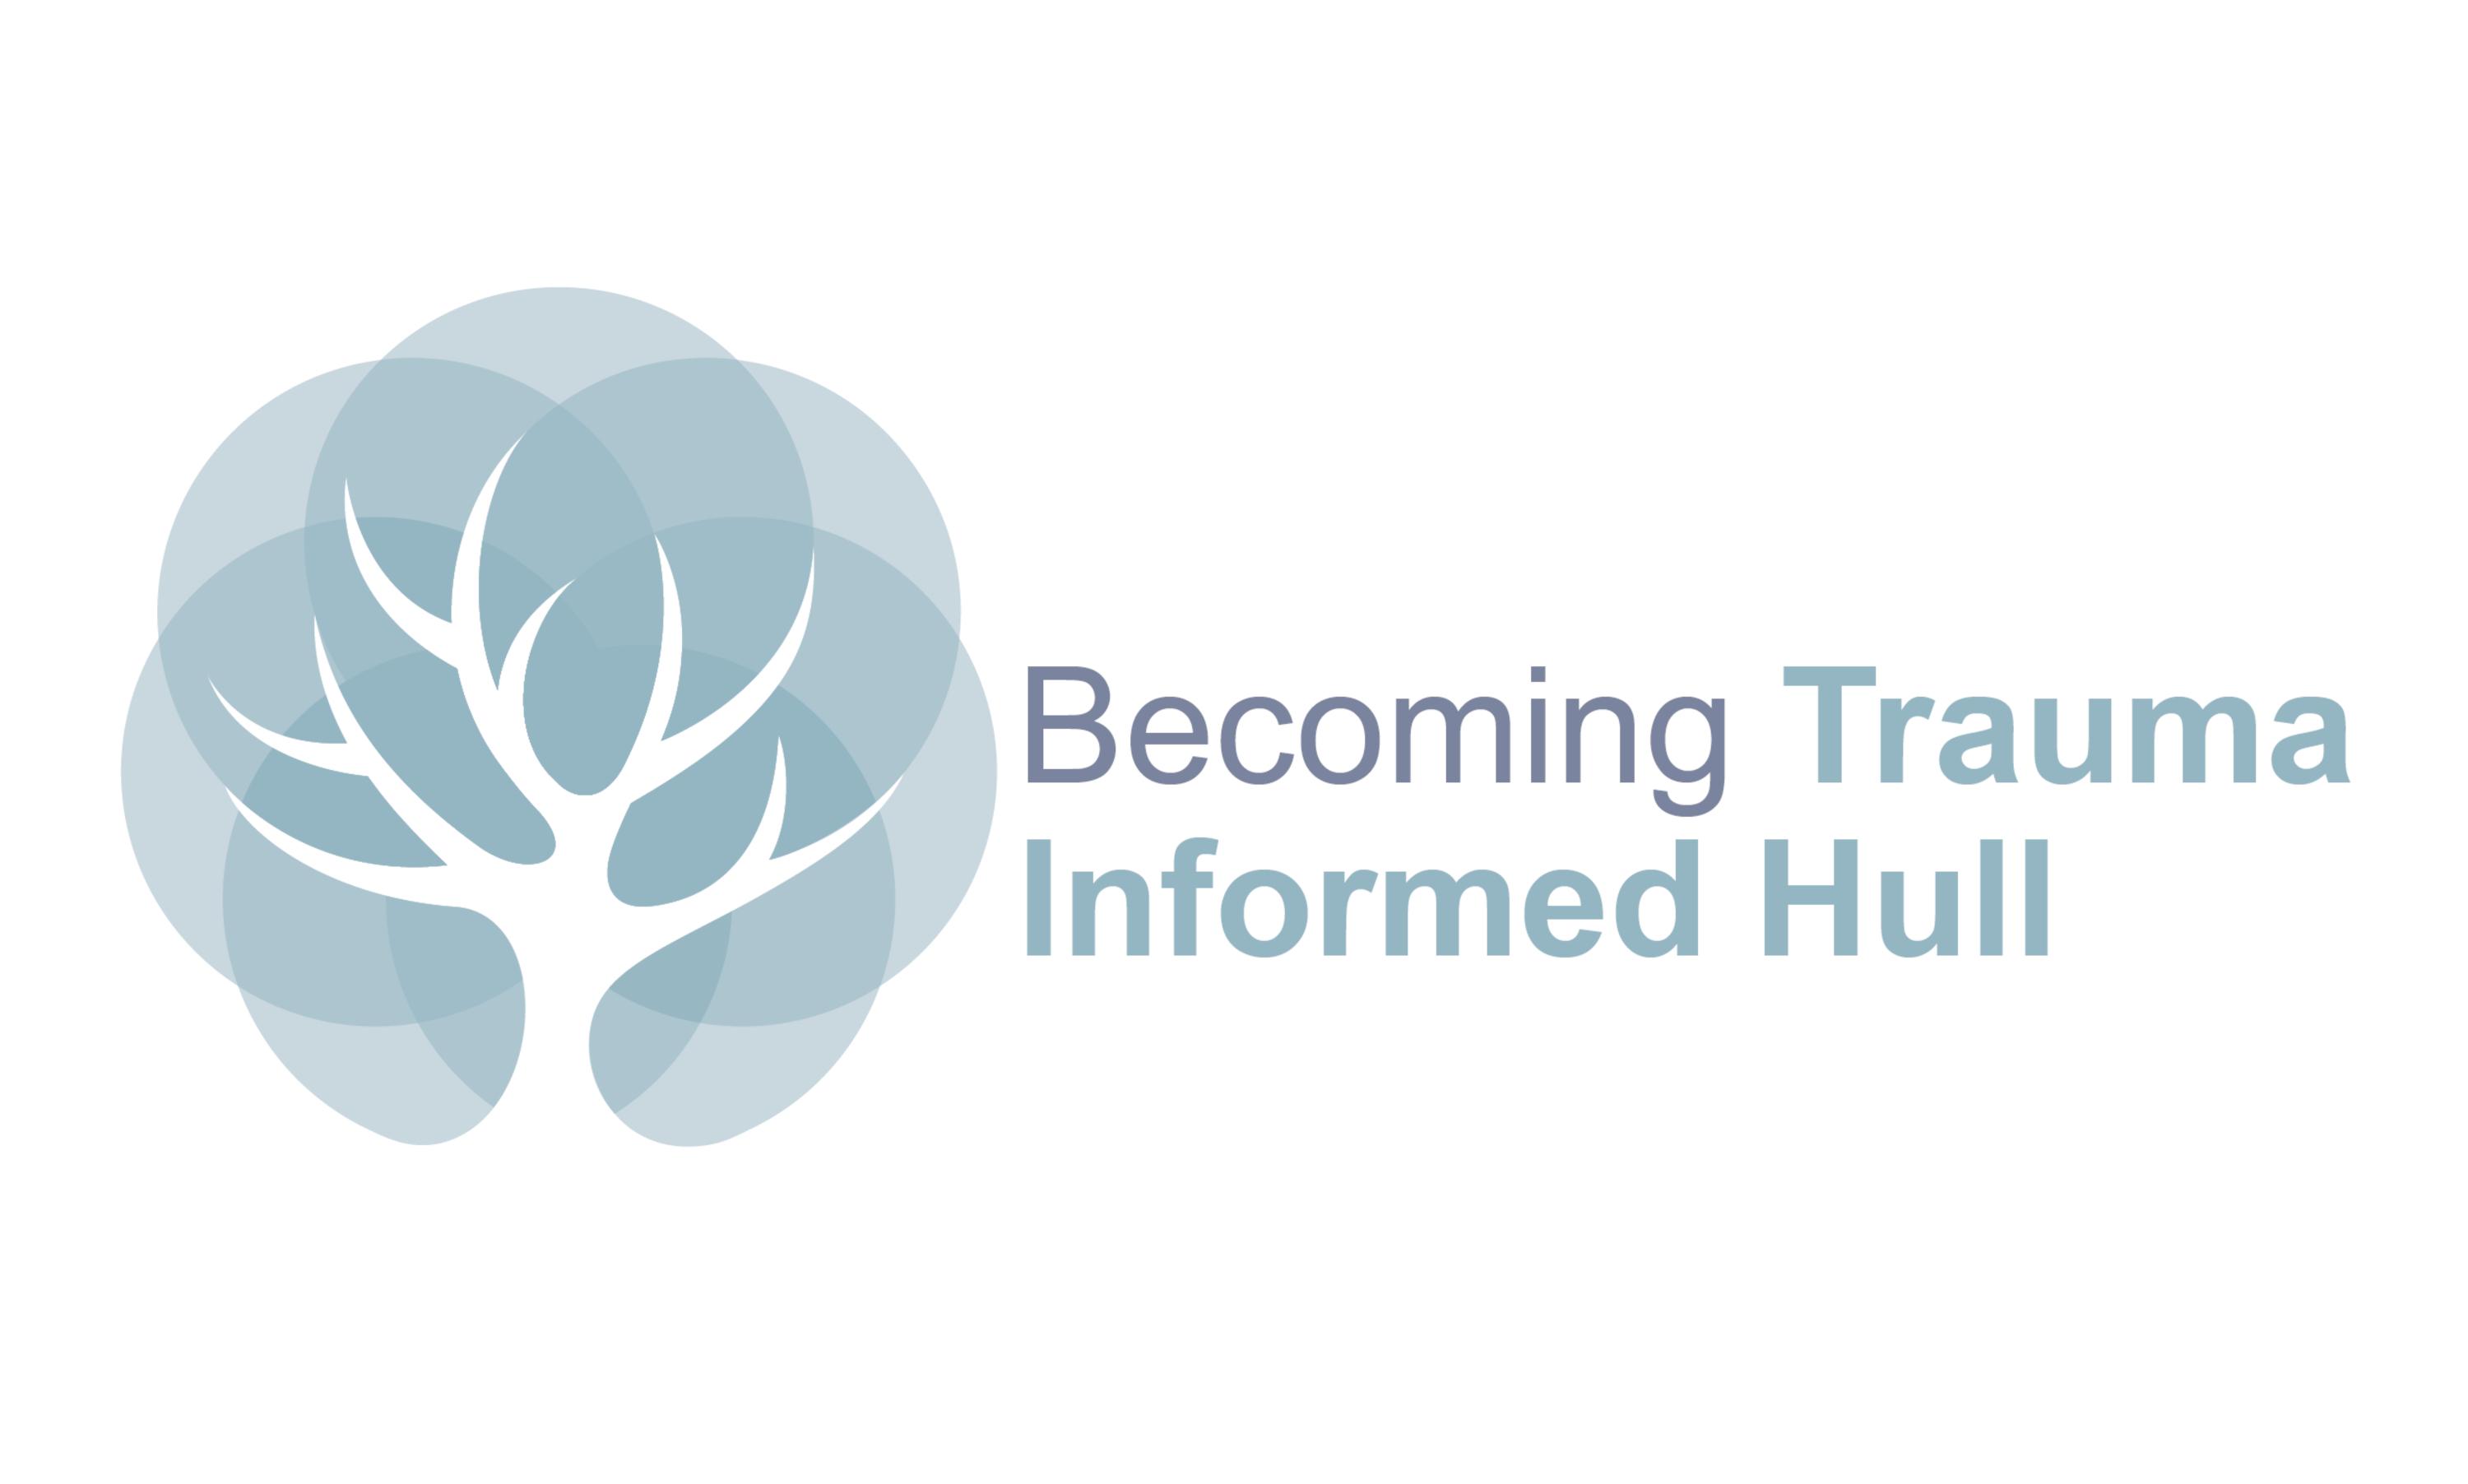 Becoming Trauma Informed Hull logo with a pale blue tree graphic